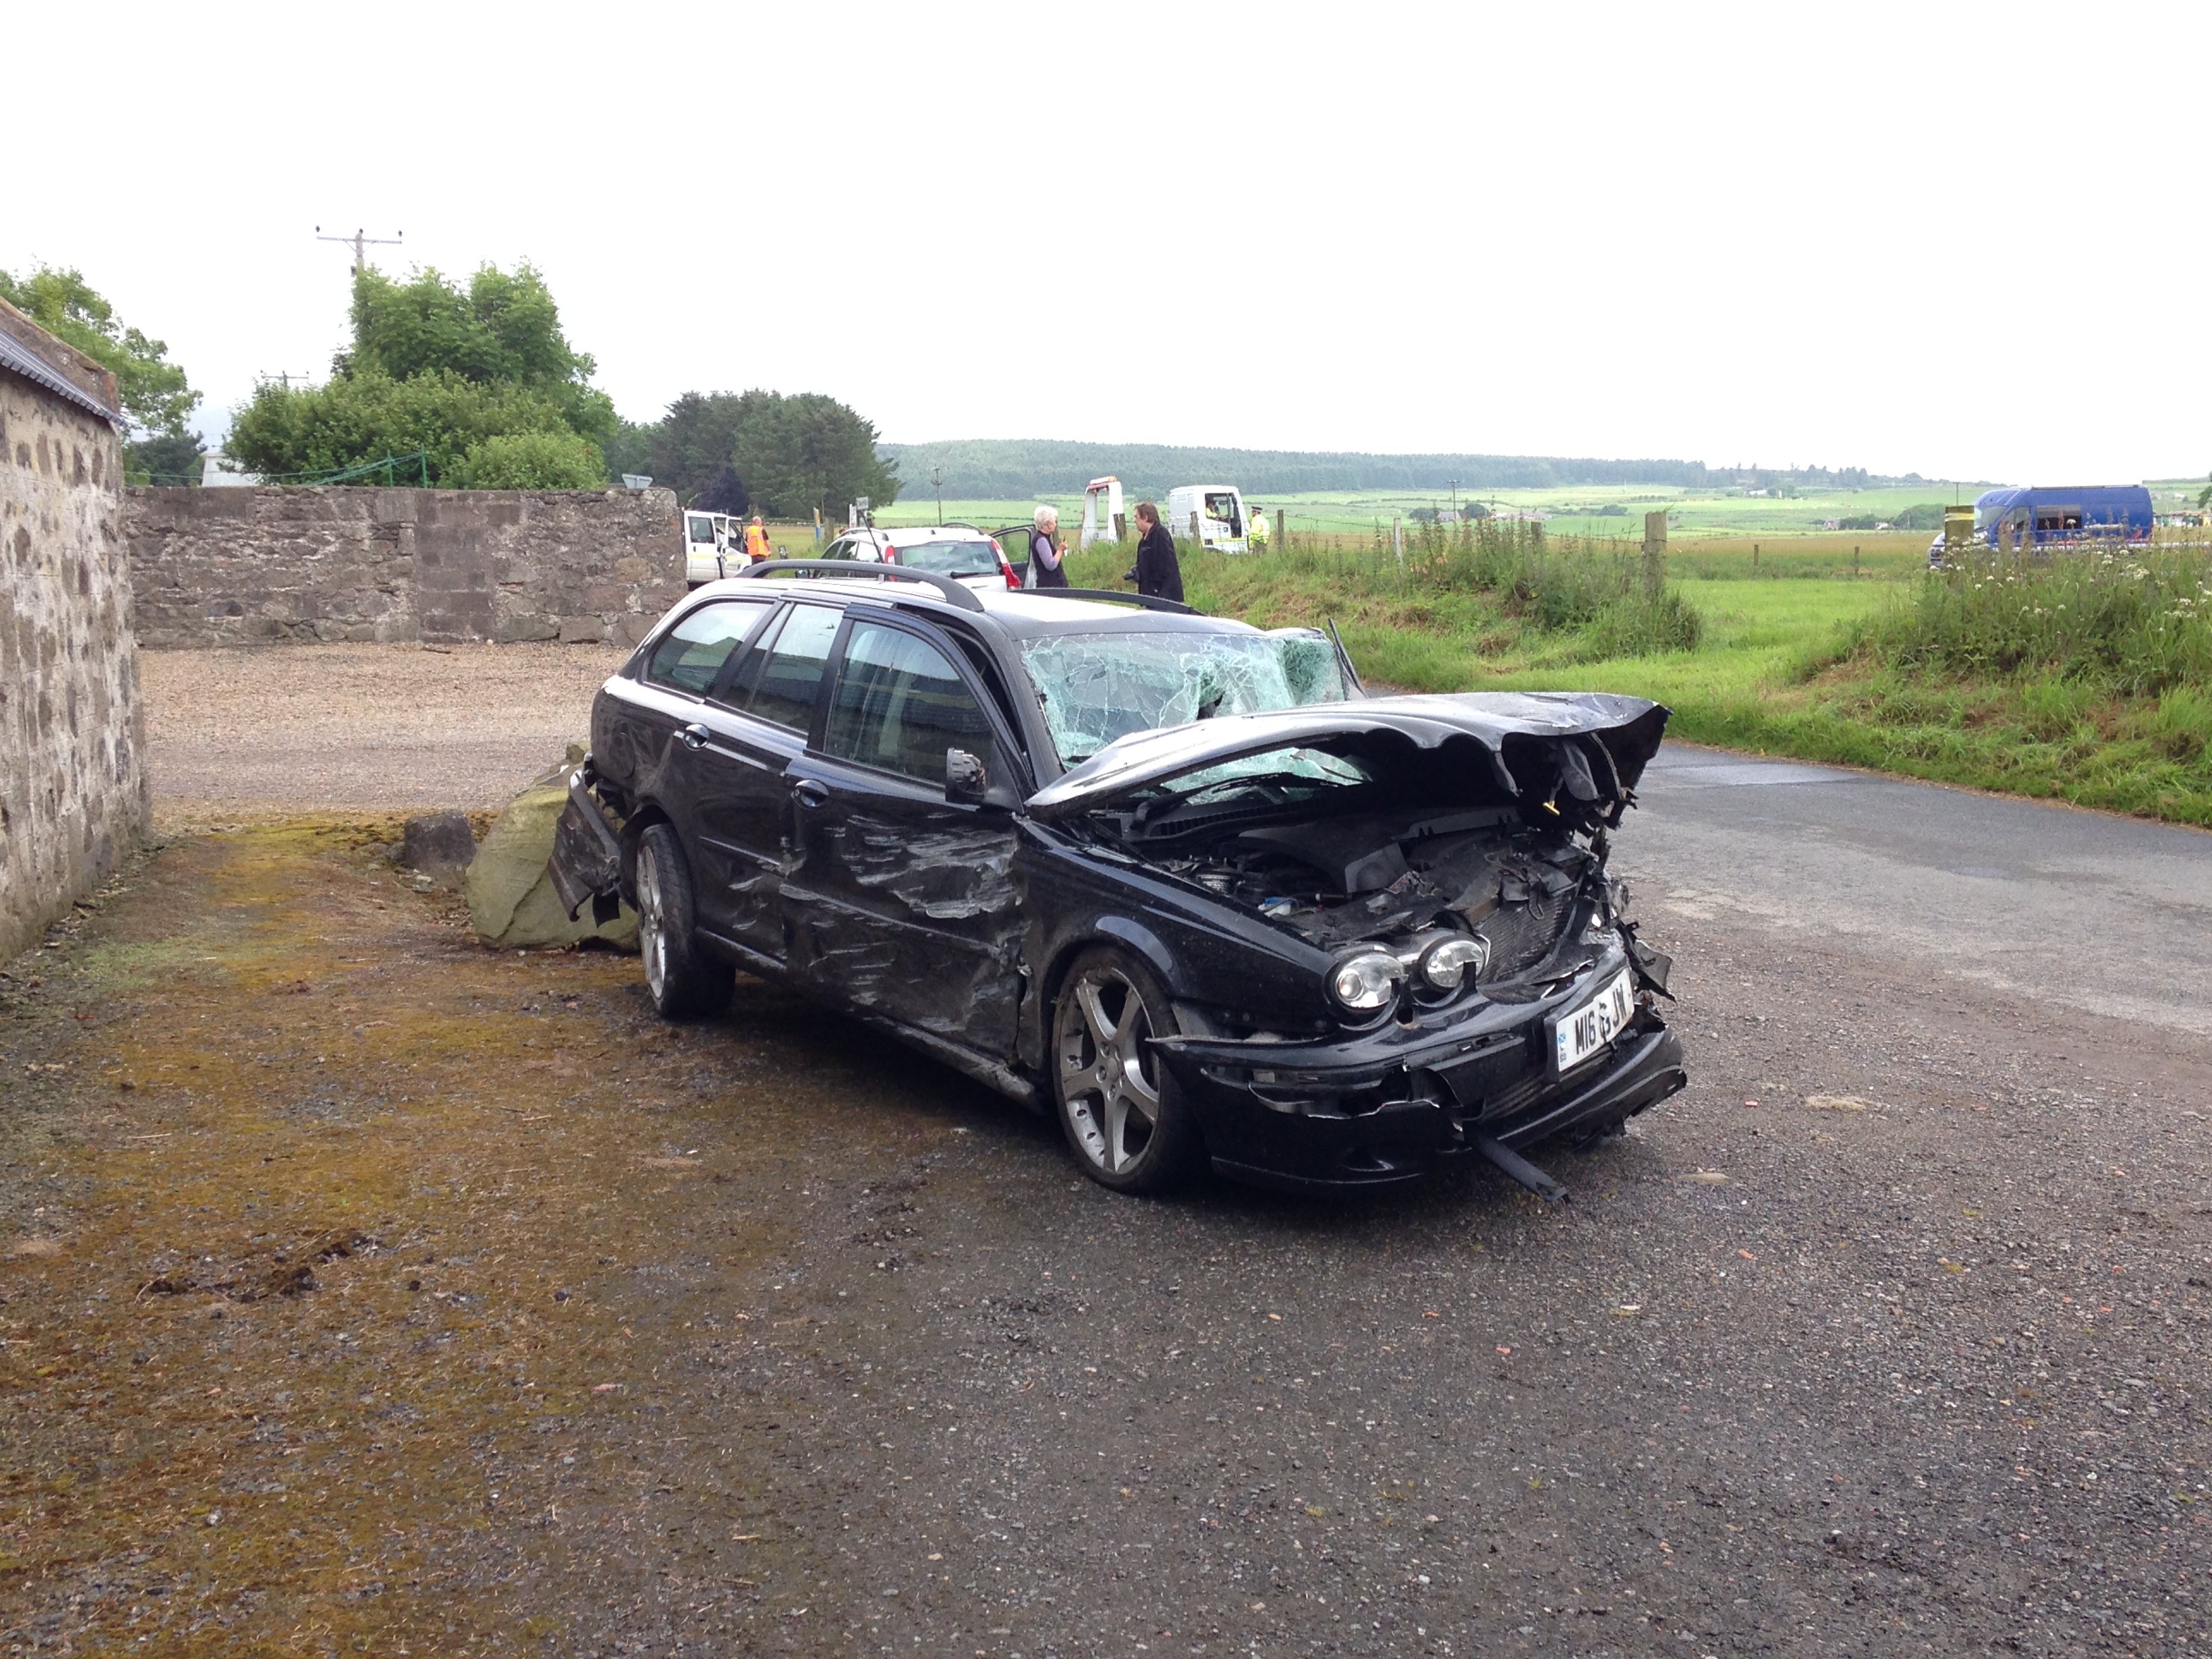 The car involved in the crash near Cortes, Aberdeenshire